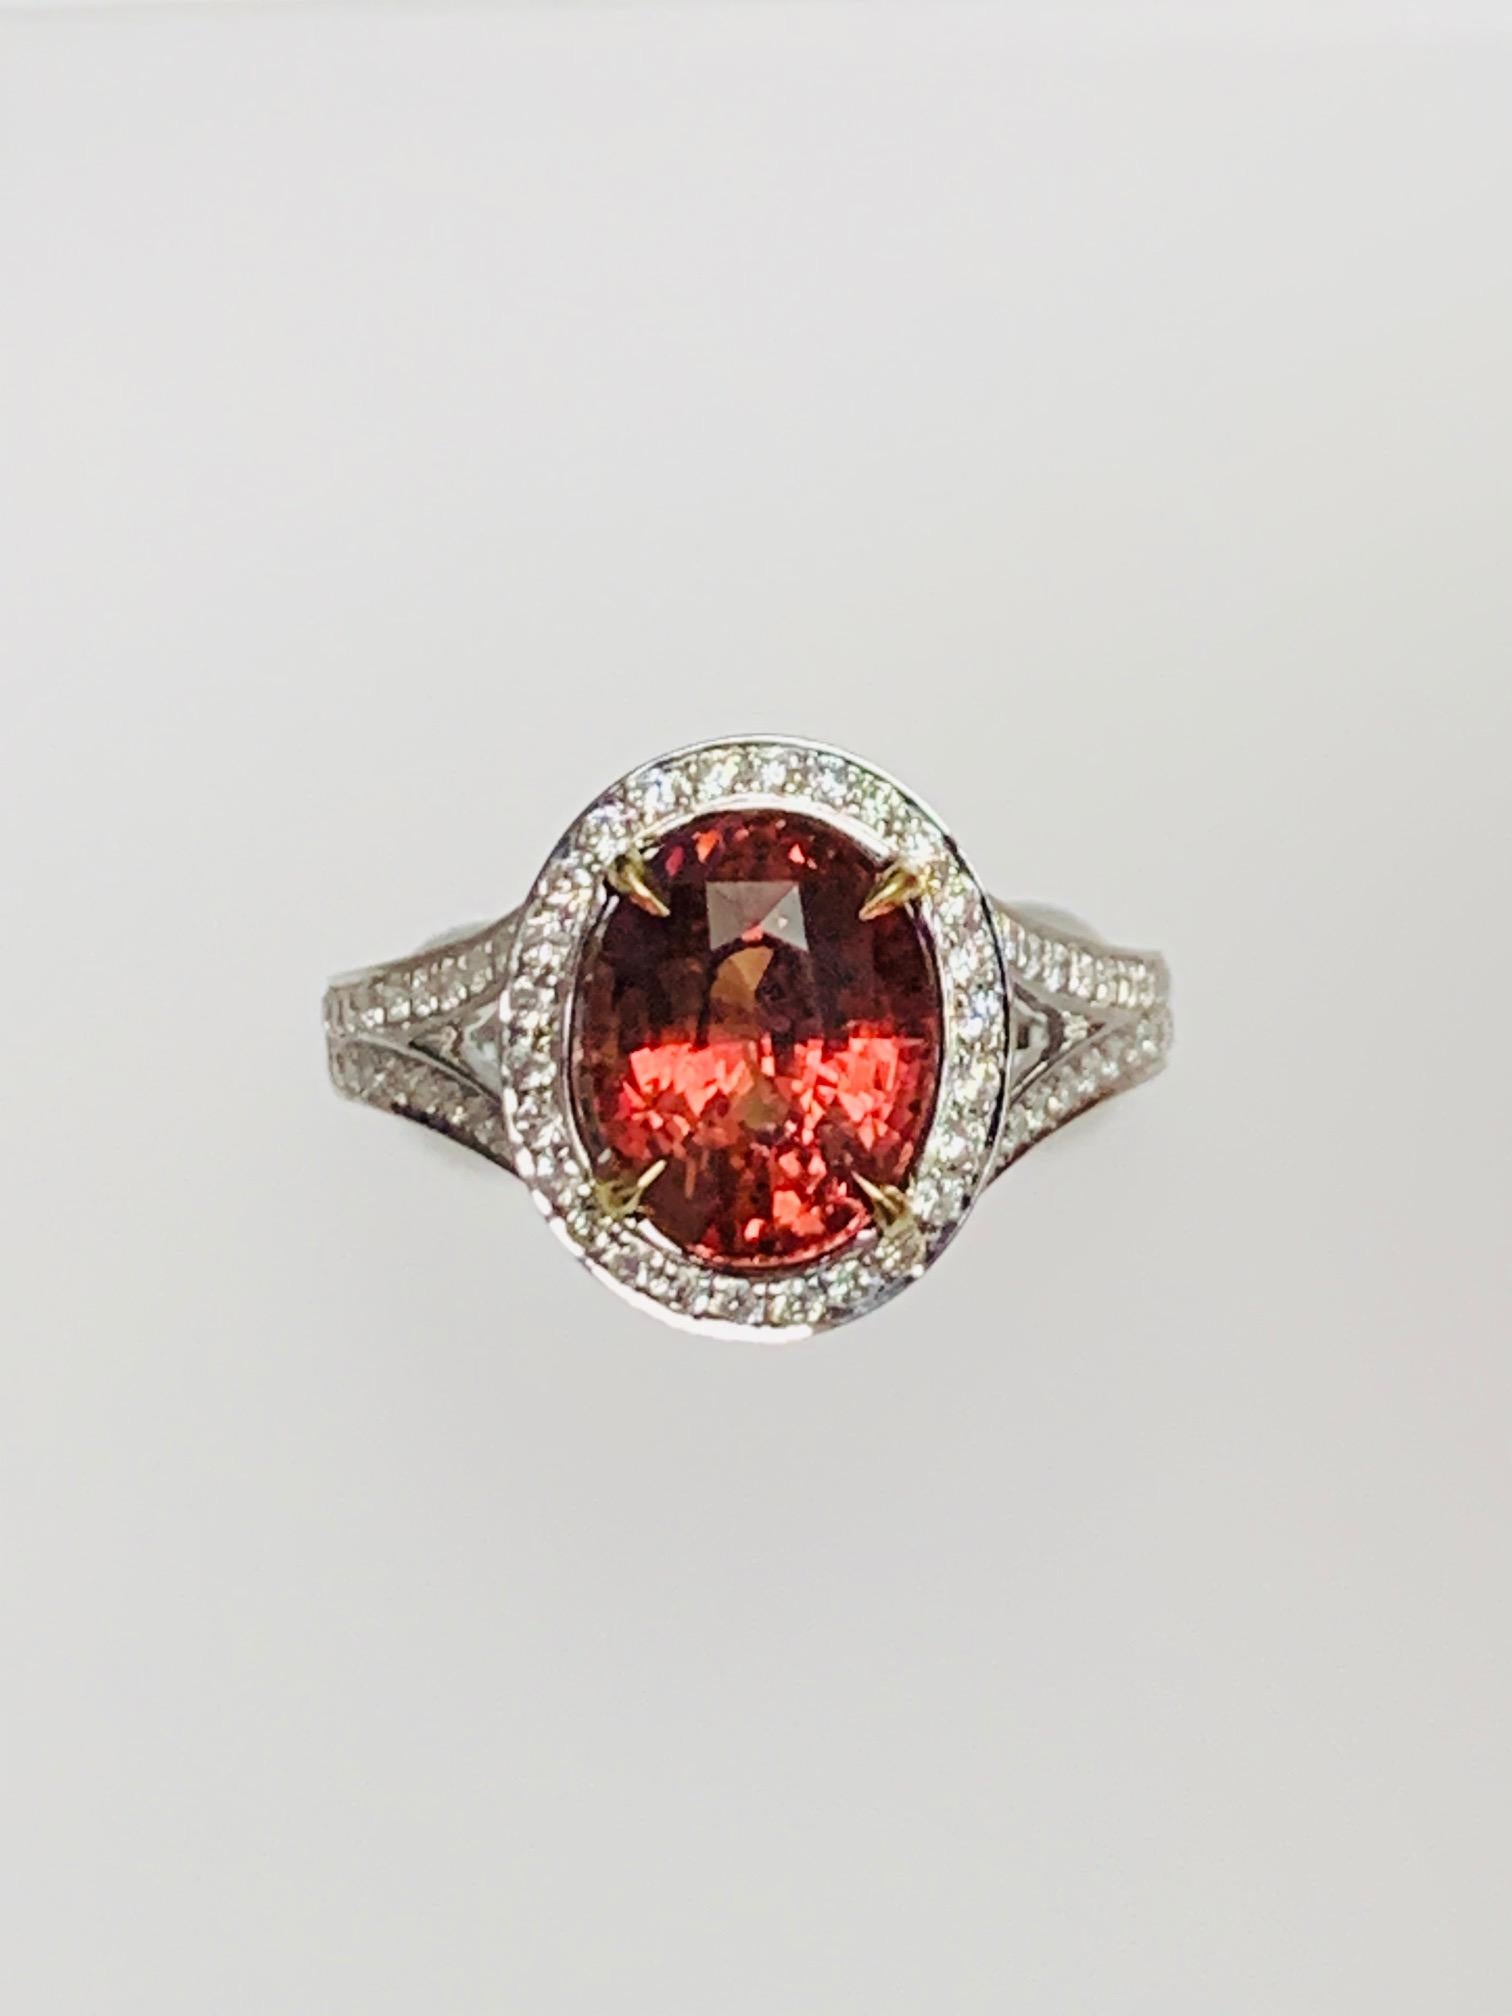 Oval Cut CDC Certified 4.16 Carat Natural No Heat Orange Sapphire Diamond Cocktail Ring For Sale